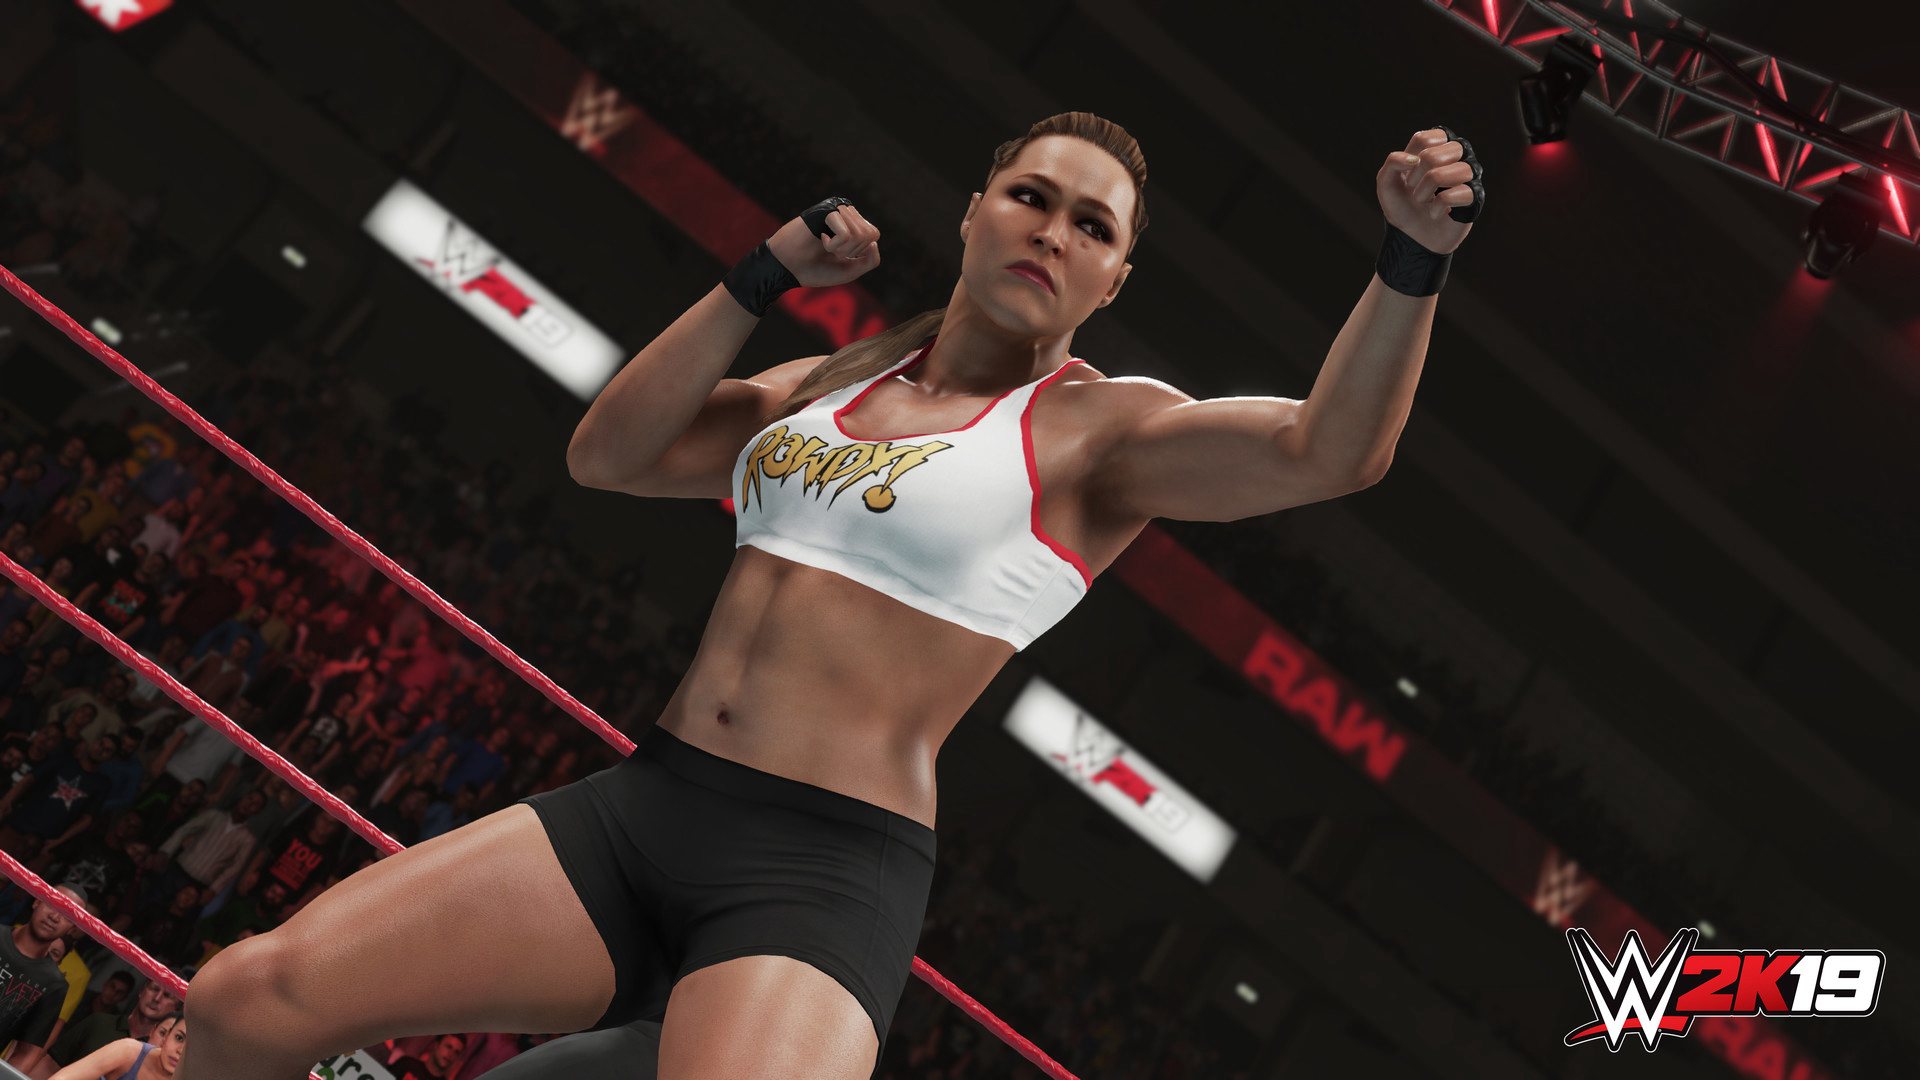 WWE 2K19 PlayStation 4 Account pixelpuffin.net Activation Link 15.81 usd